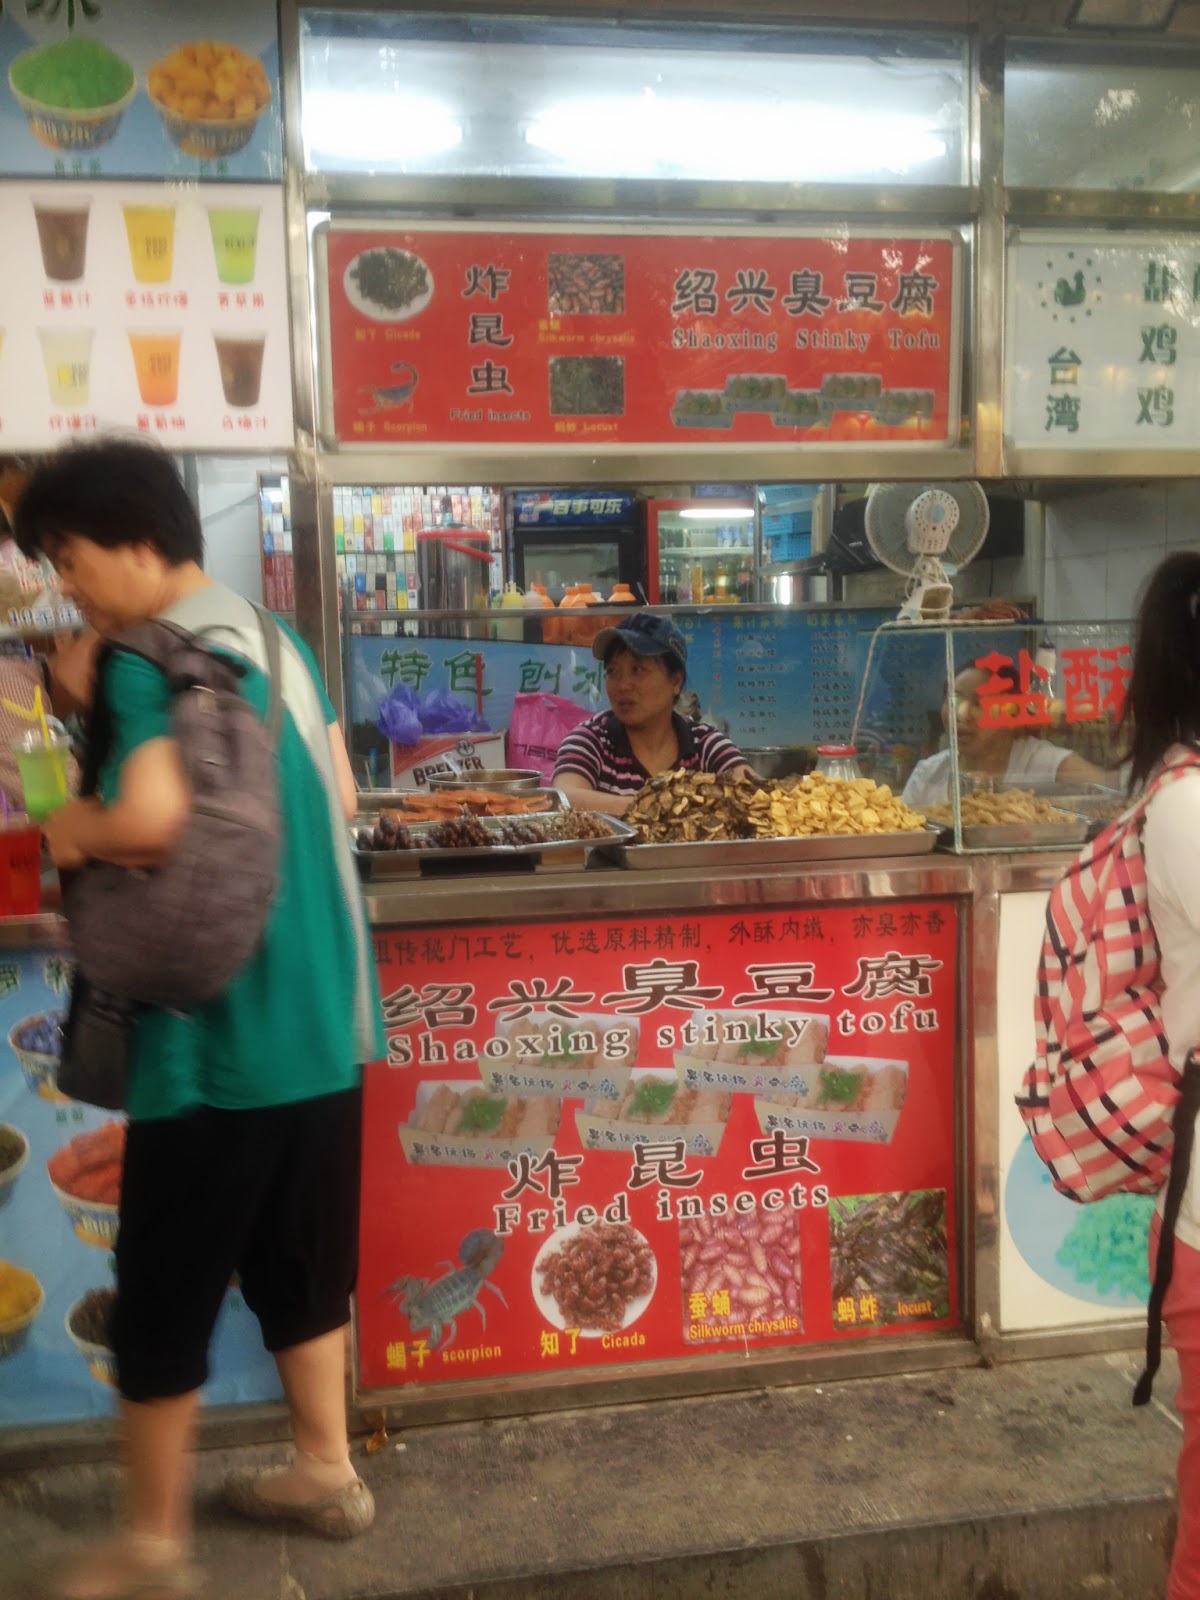 Nom nom!  Fried insects and stinky tofu...it»s hard to choose